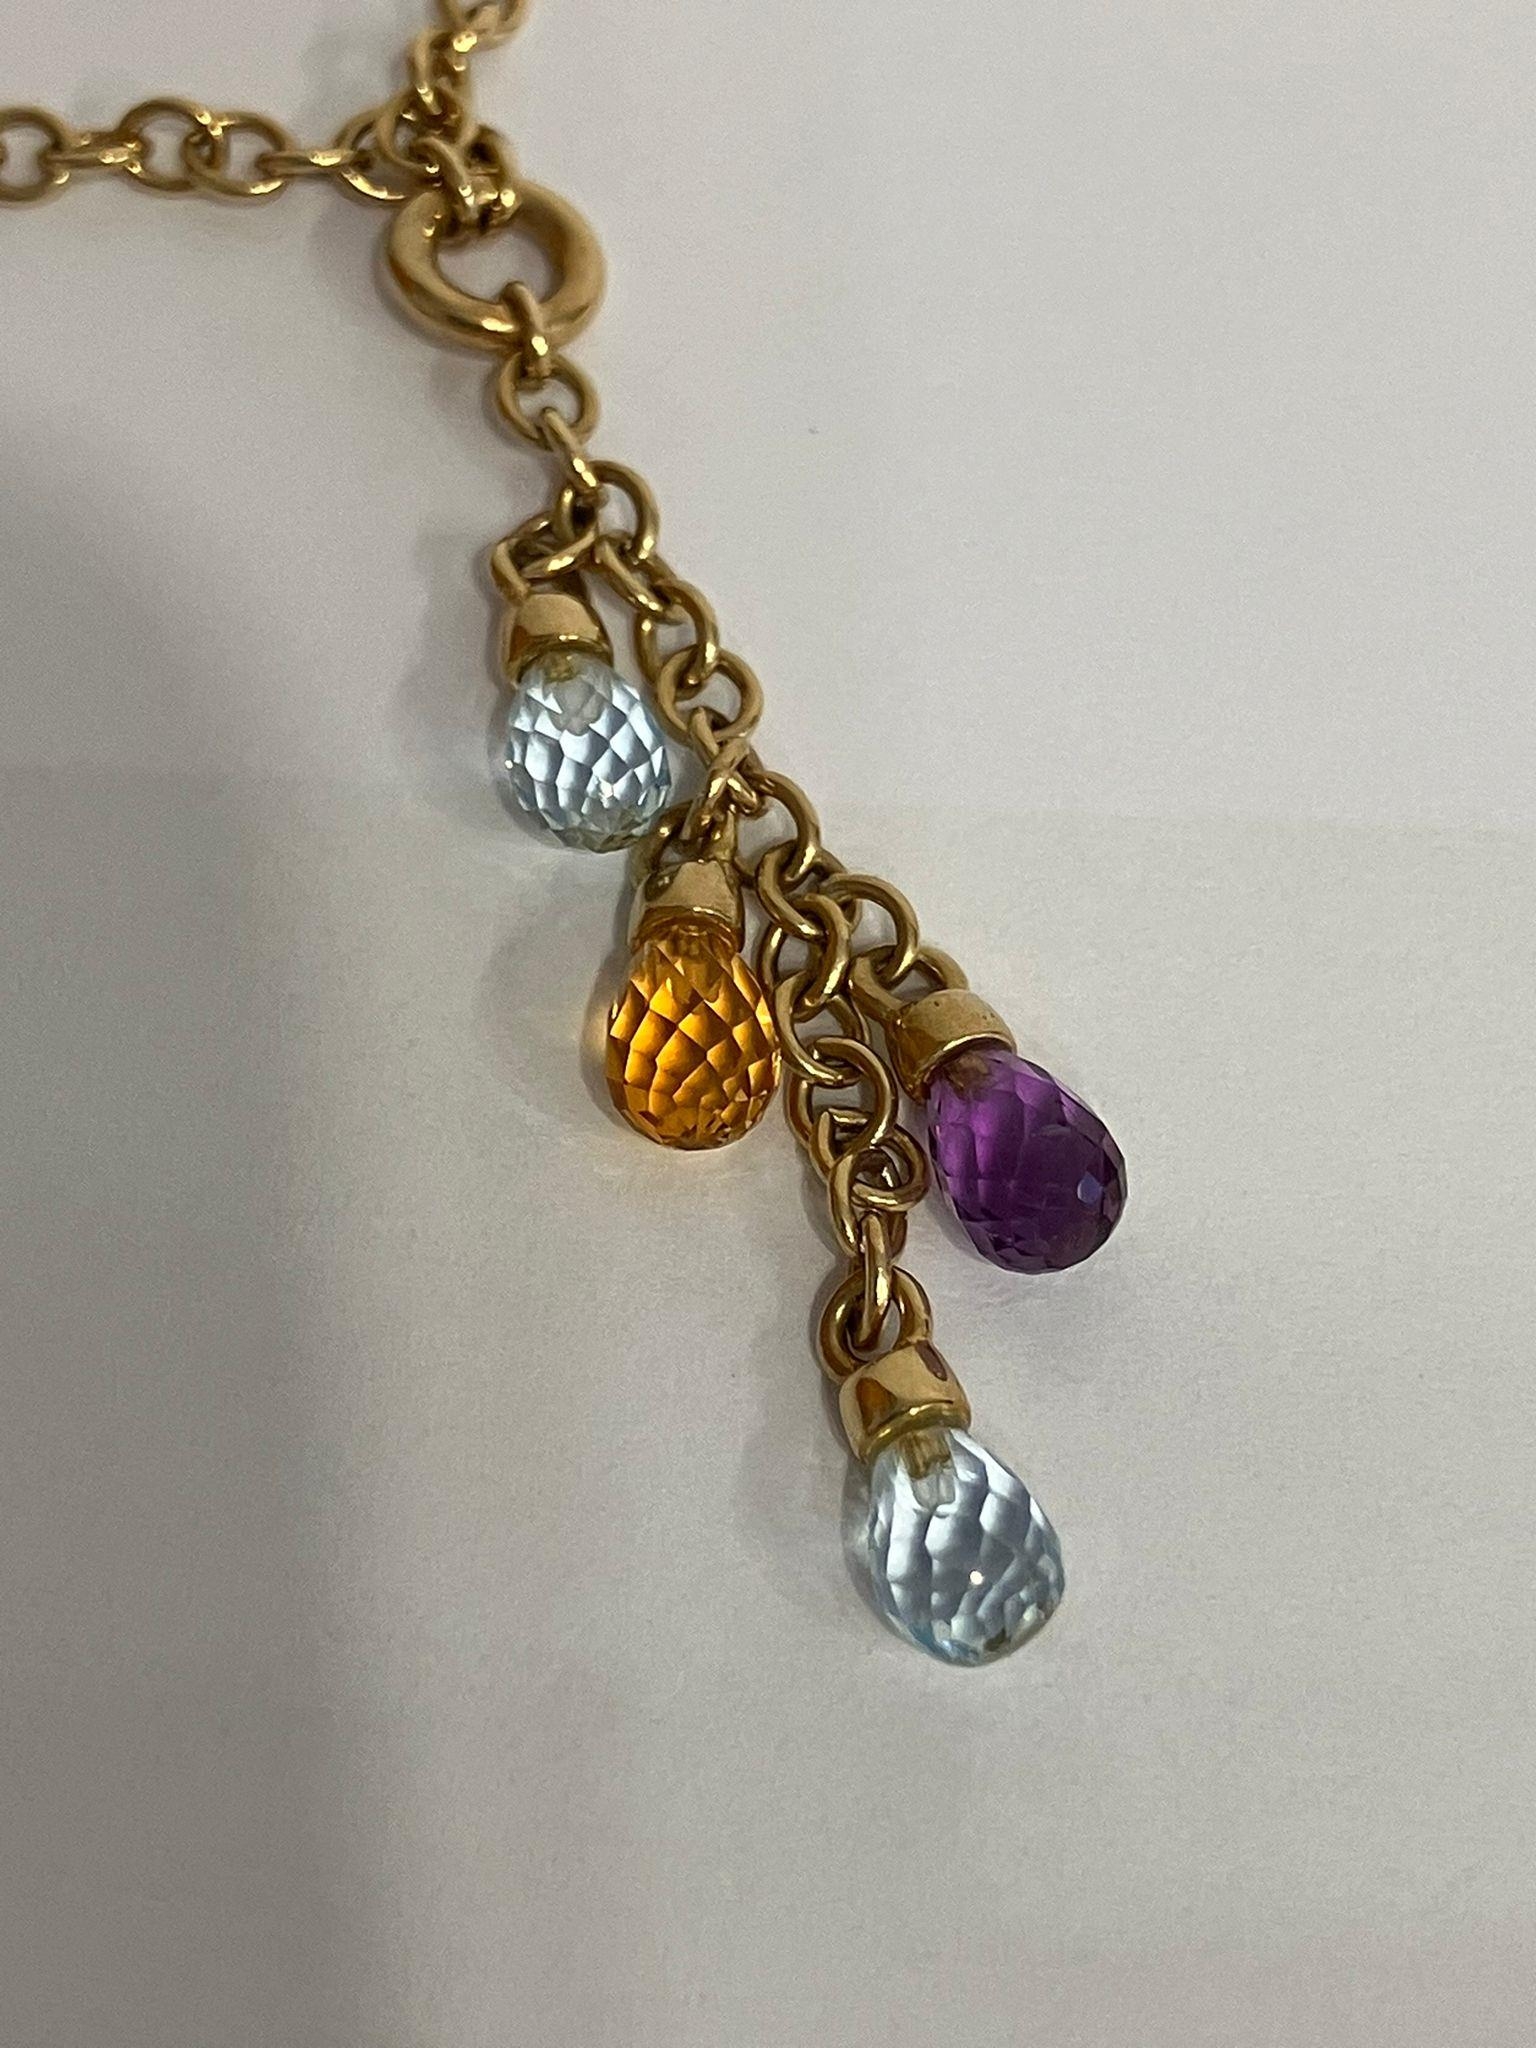 Fabulous 9 carat GOLD CHAIN LINK NECKLACE with gemstone drops. Gemstones to include Amethyst, - Image 2 of 3